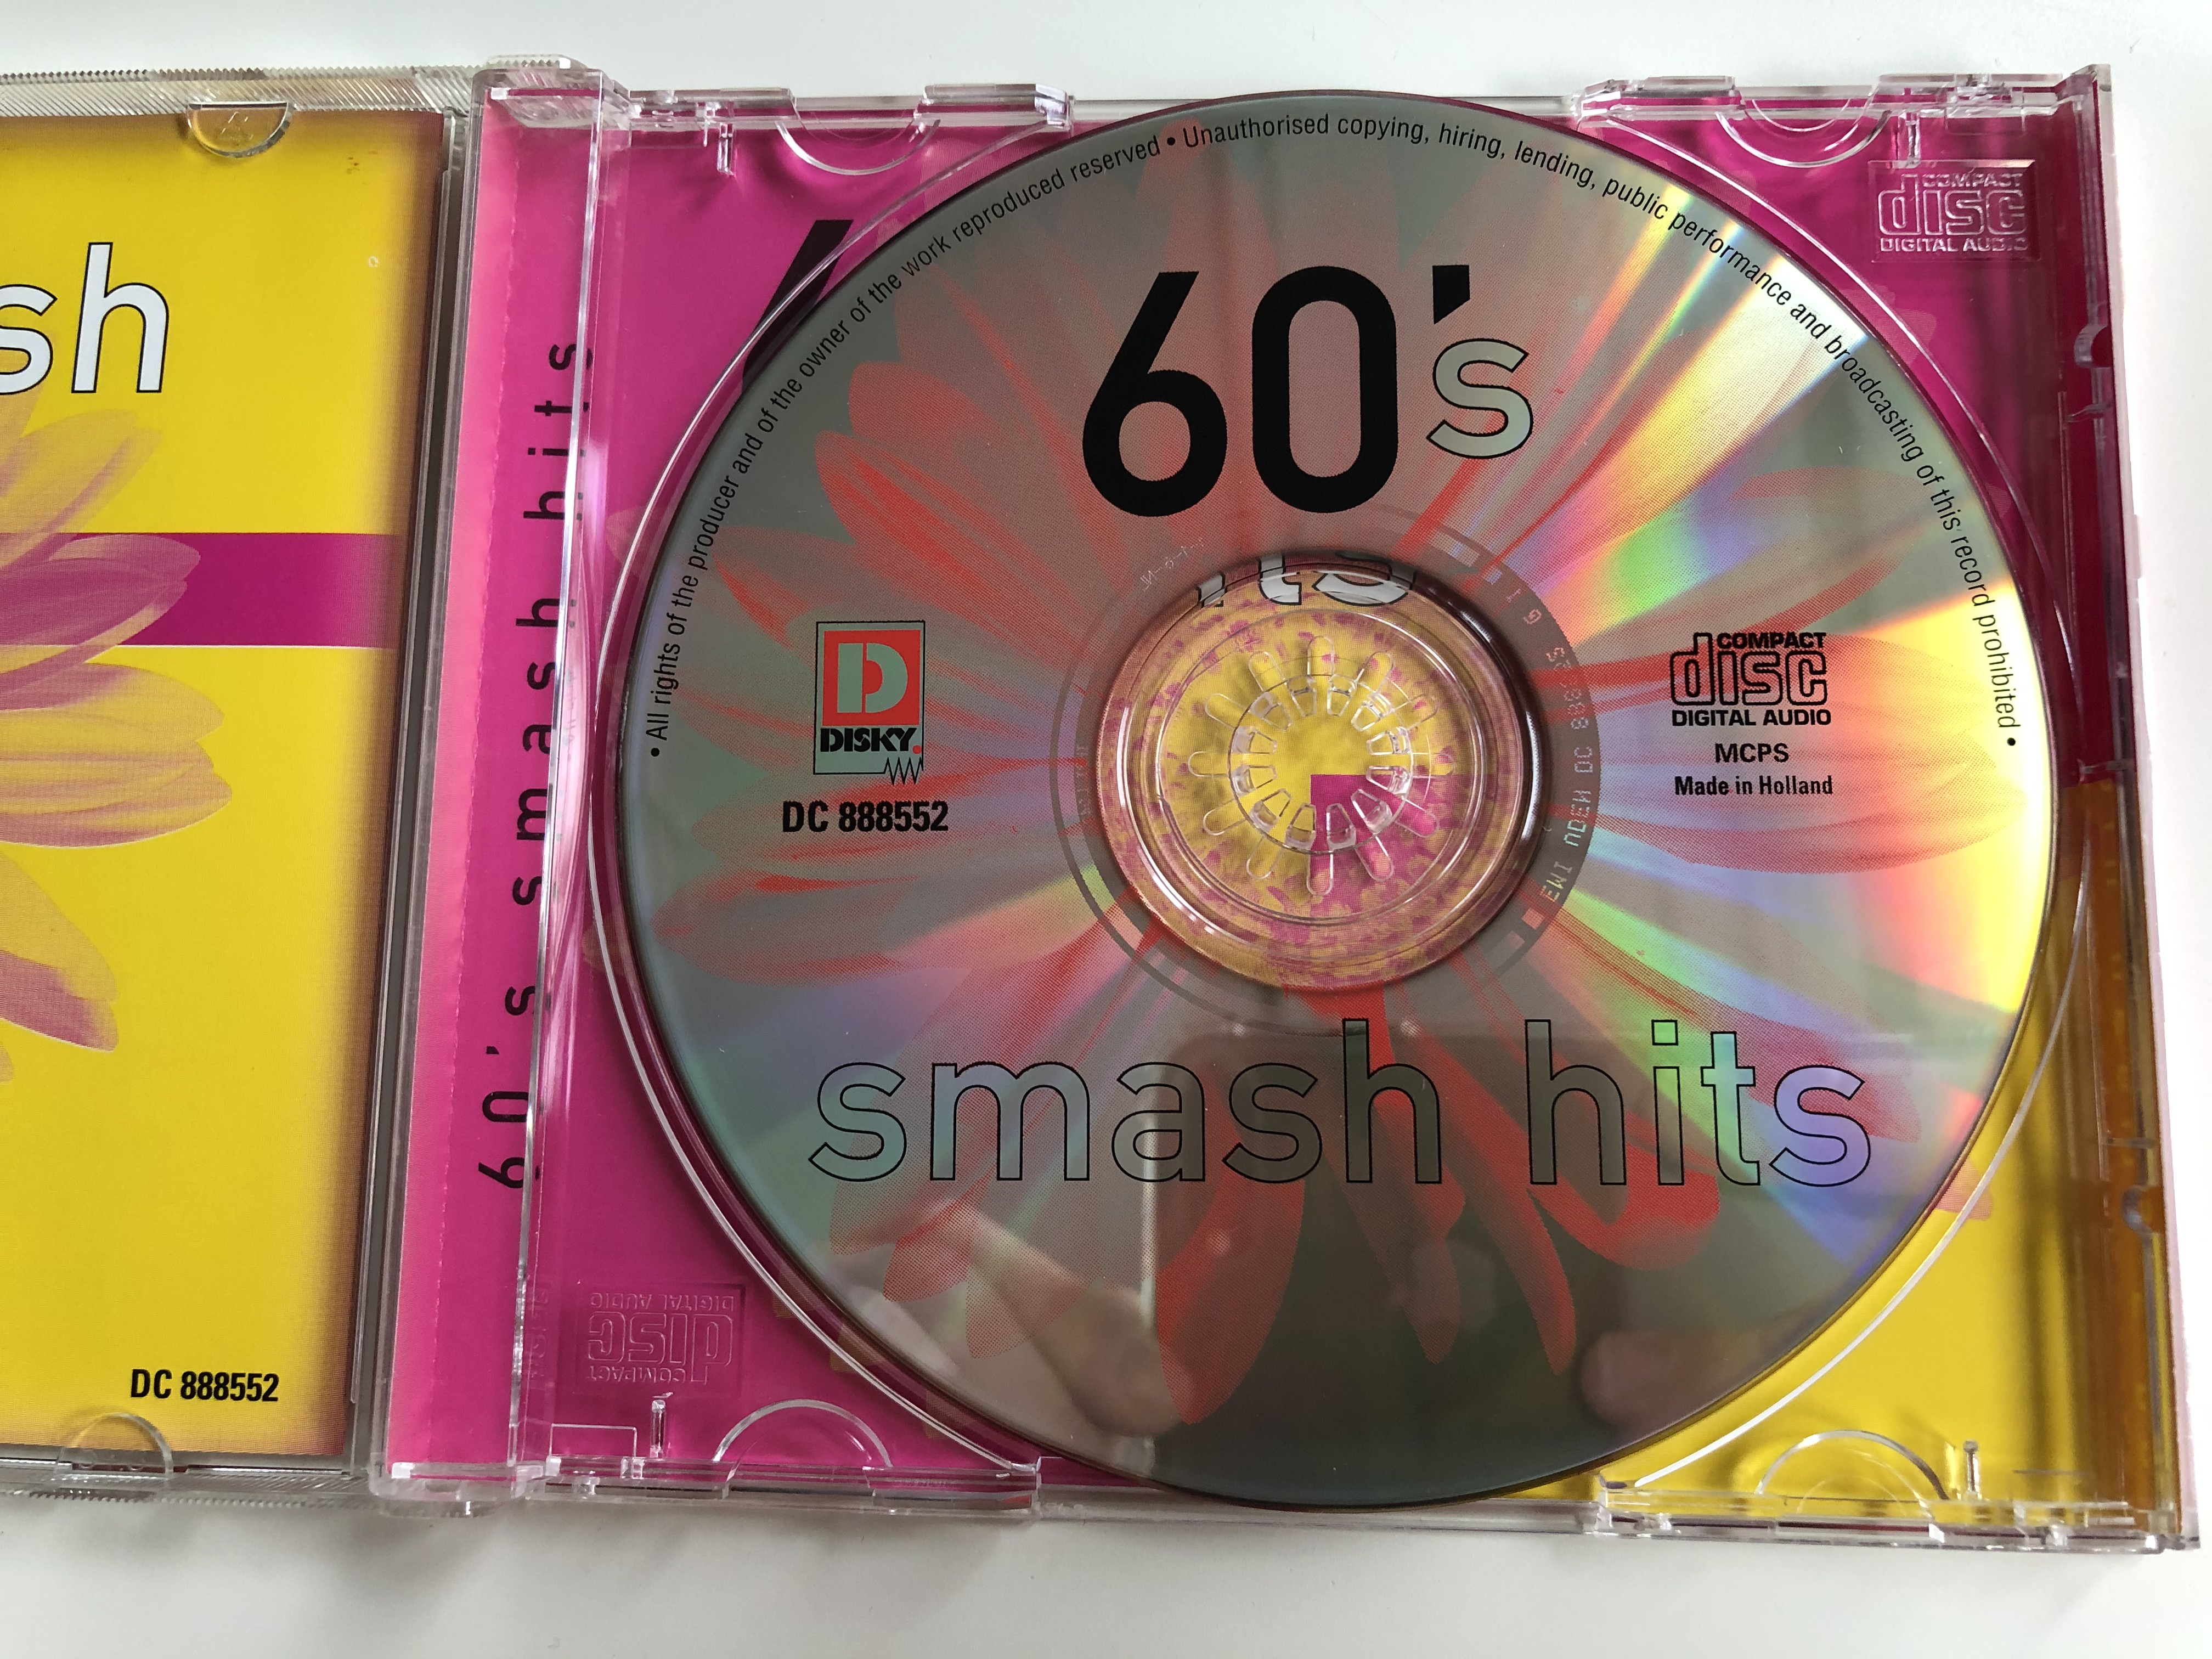 60-s-smash-hits-the-everly-brothers-the-shirelles-fats-domino-del-shannon-the-temptations-disky-audio-cd-1998-dc-888552-3-.jpg